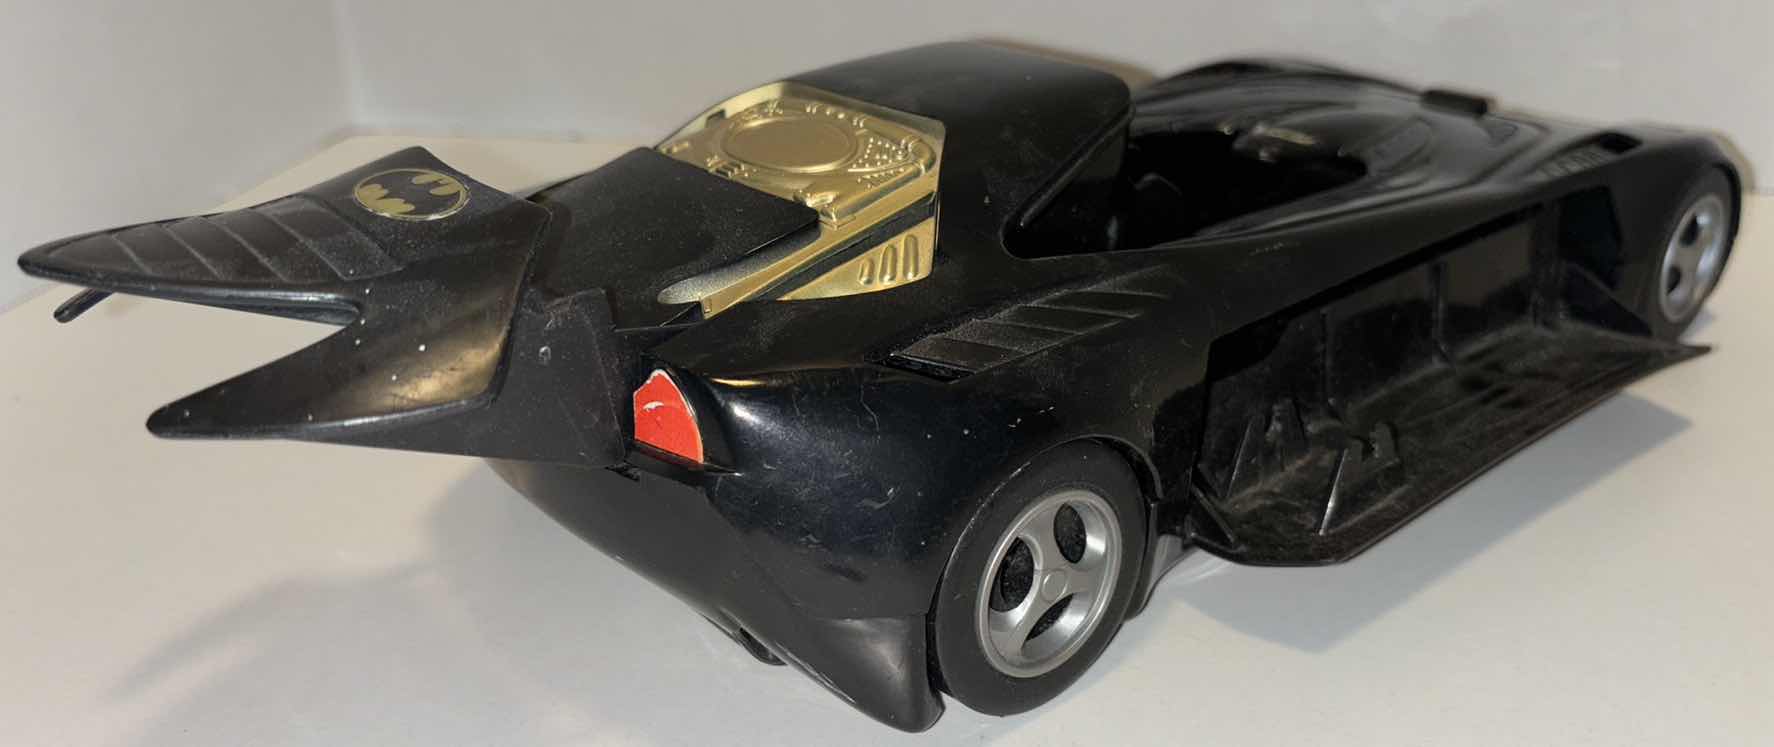 Photo 4 of ASSORTED VERSIONS OF BATMOBILE VEHICLES (3)